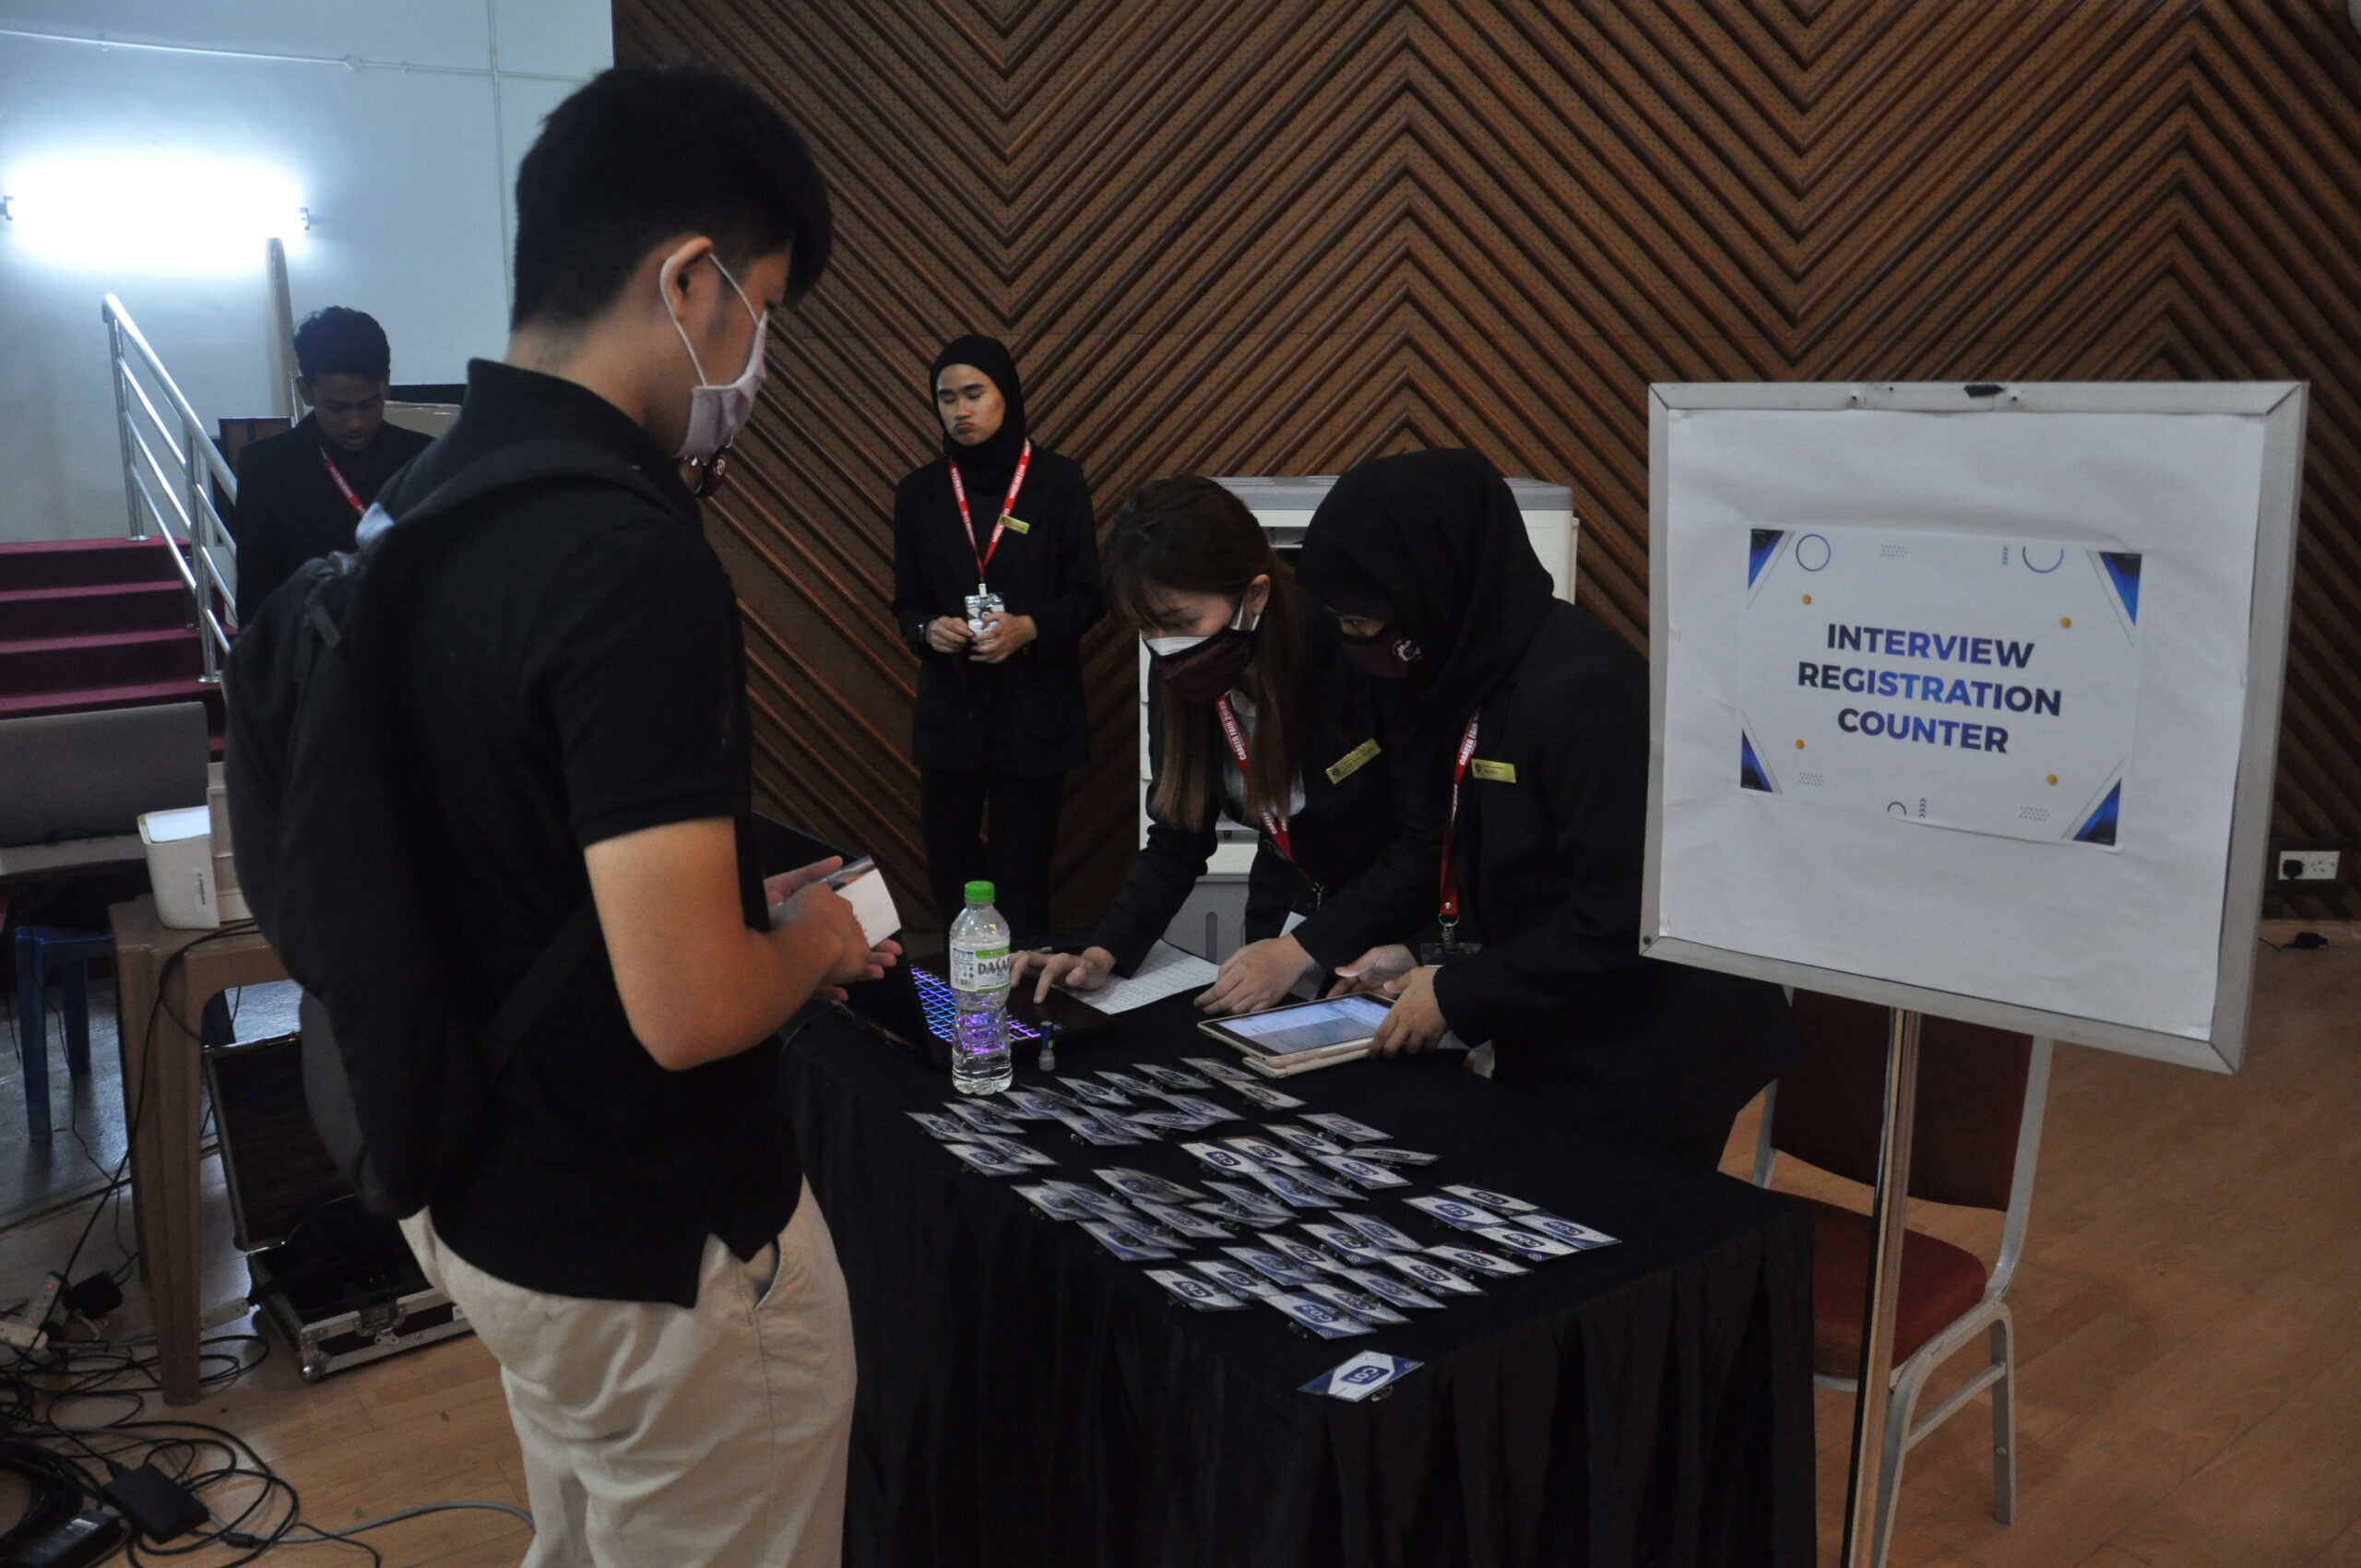 Student registering for interview session